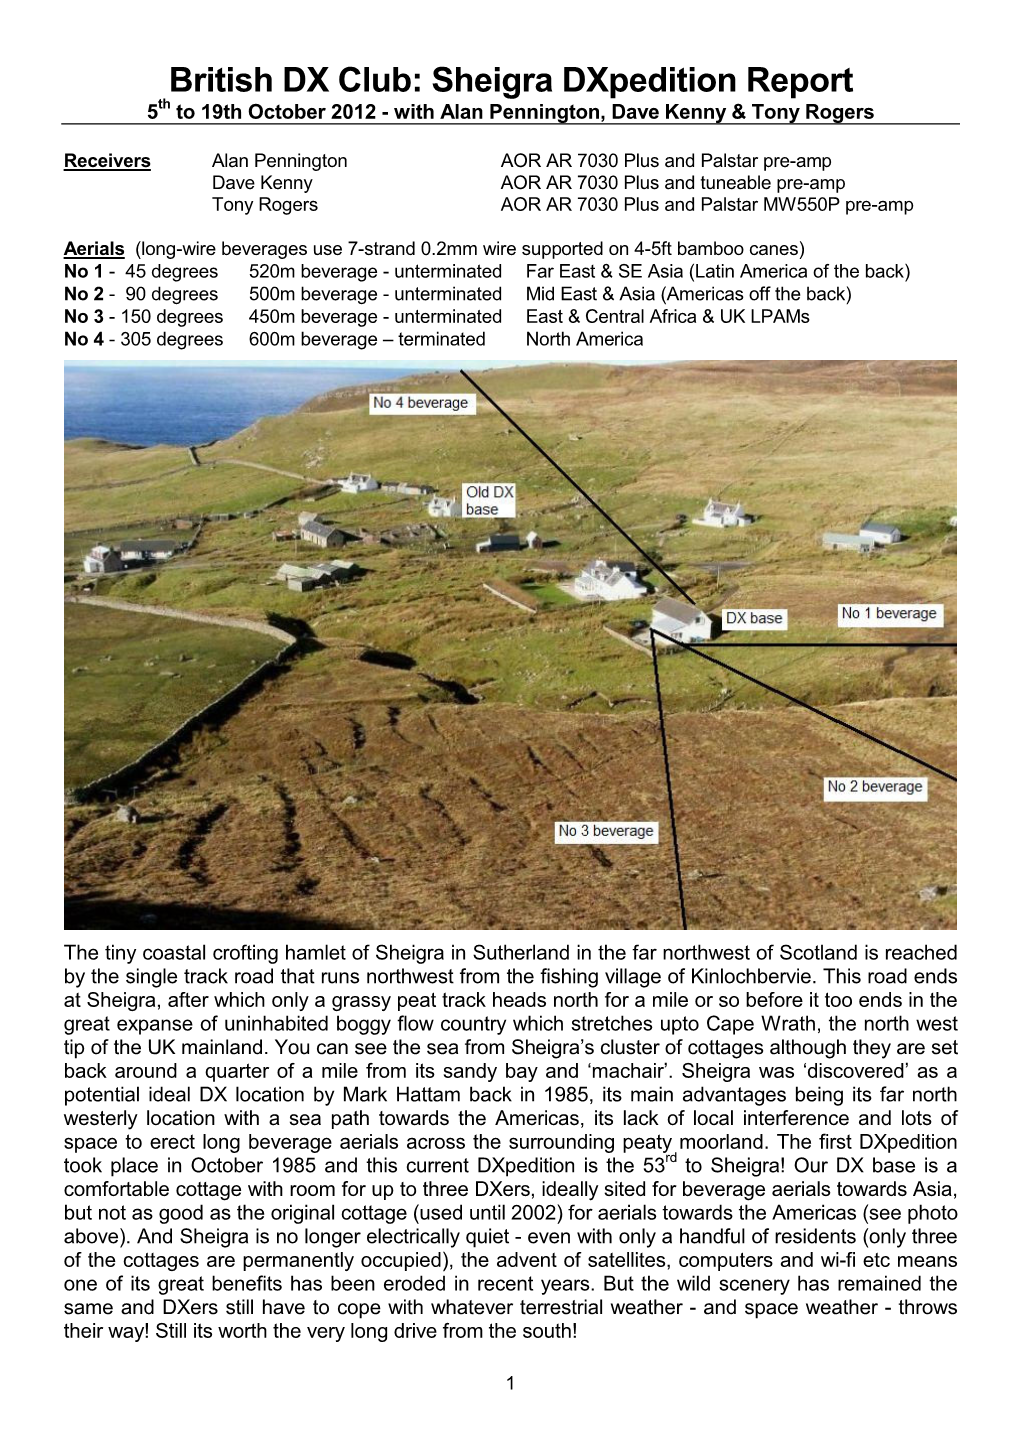 Sheigra Dxpedition Report 5Th to 19Th October 2012 - with Alan Pennington, Dave Kenny & Tony Rogers